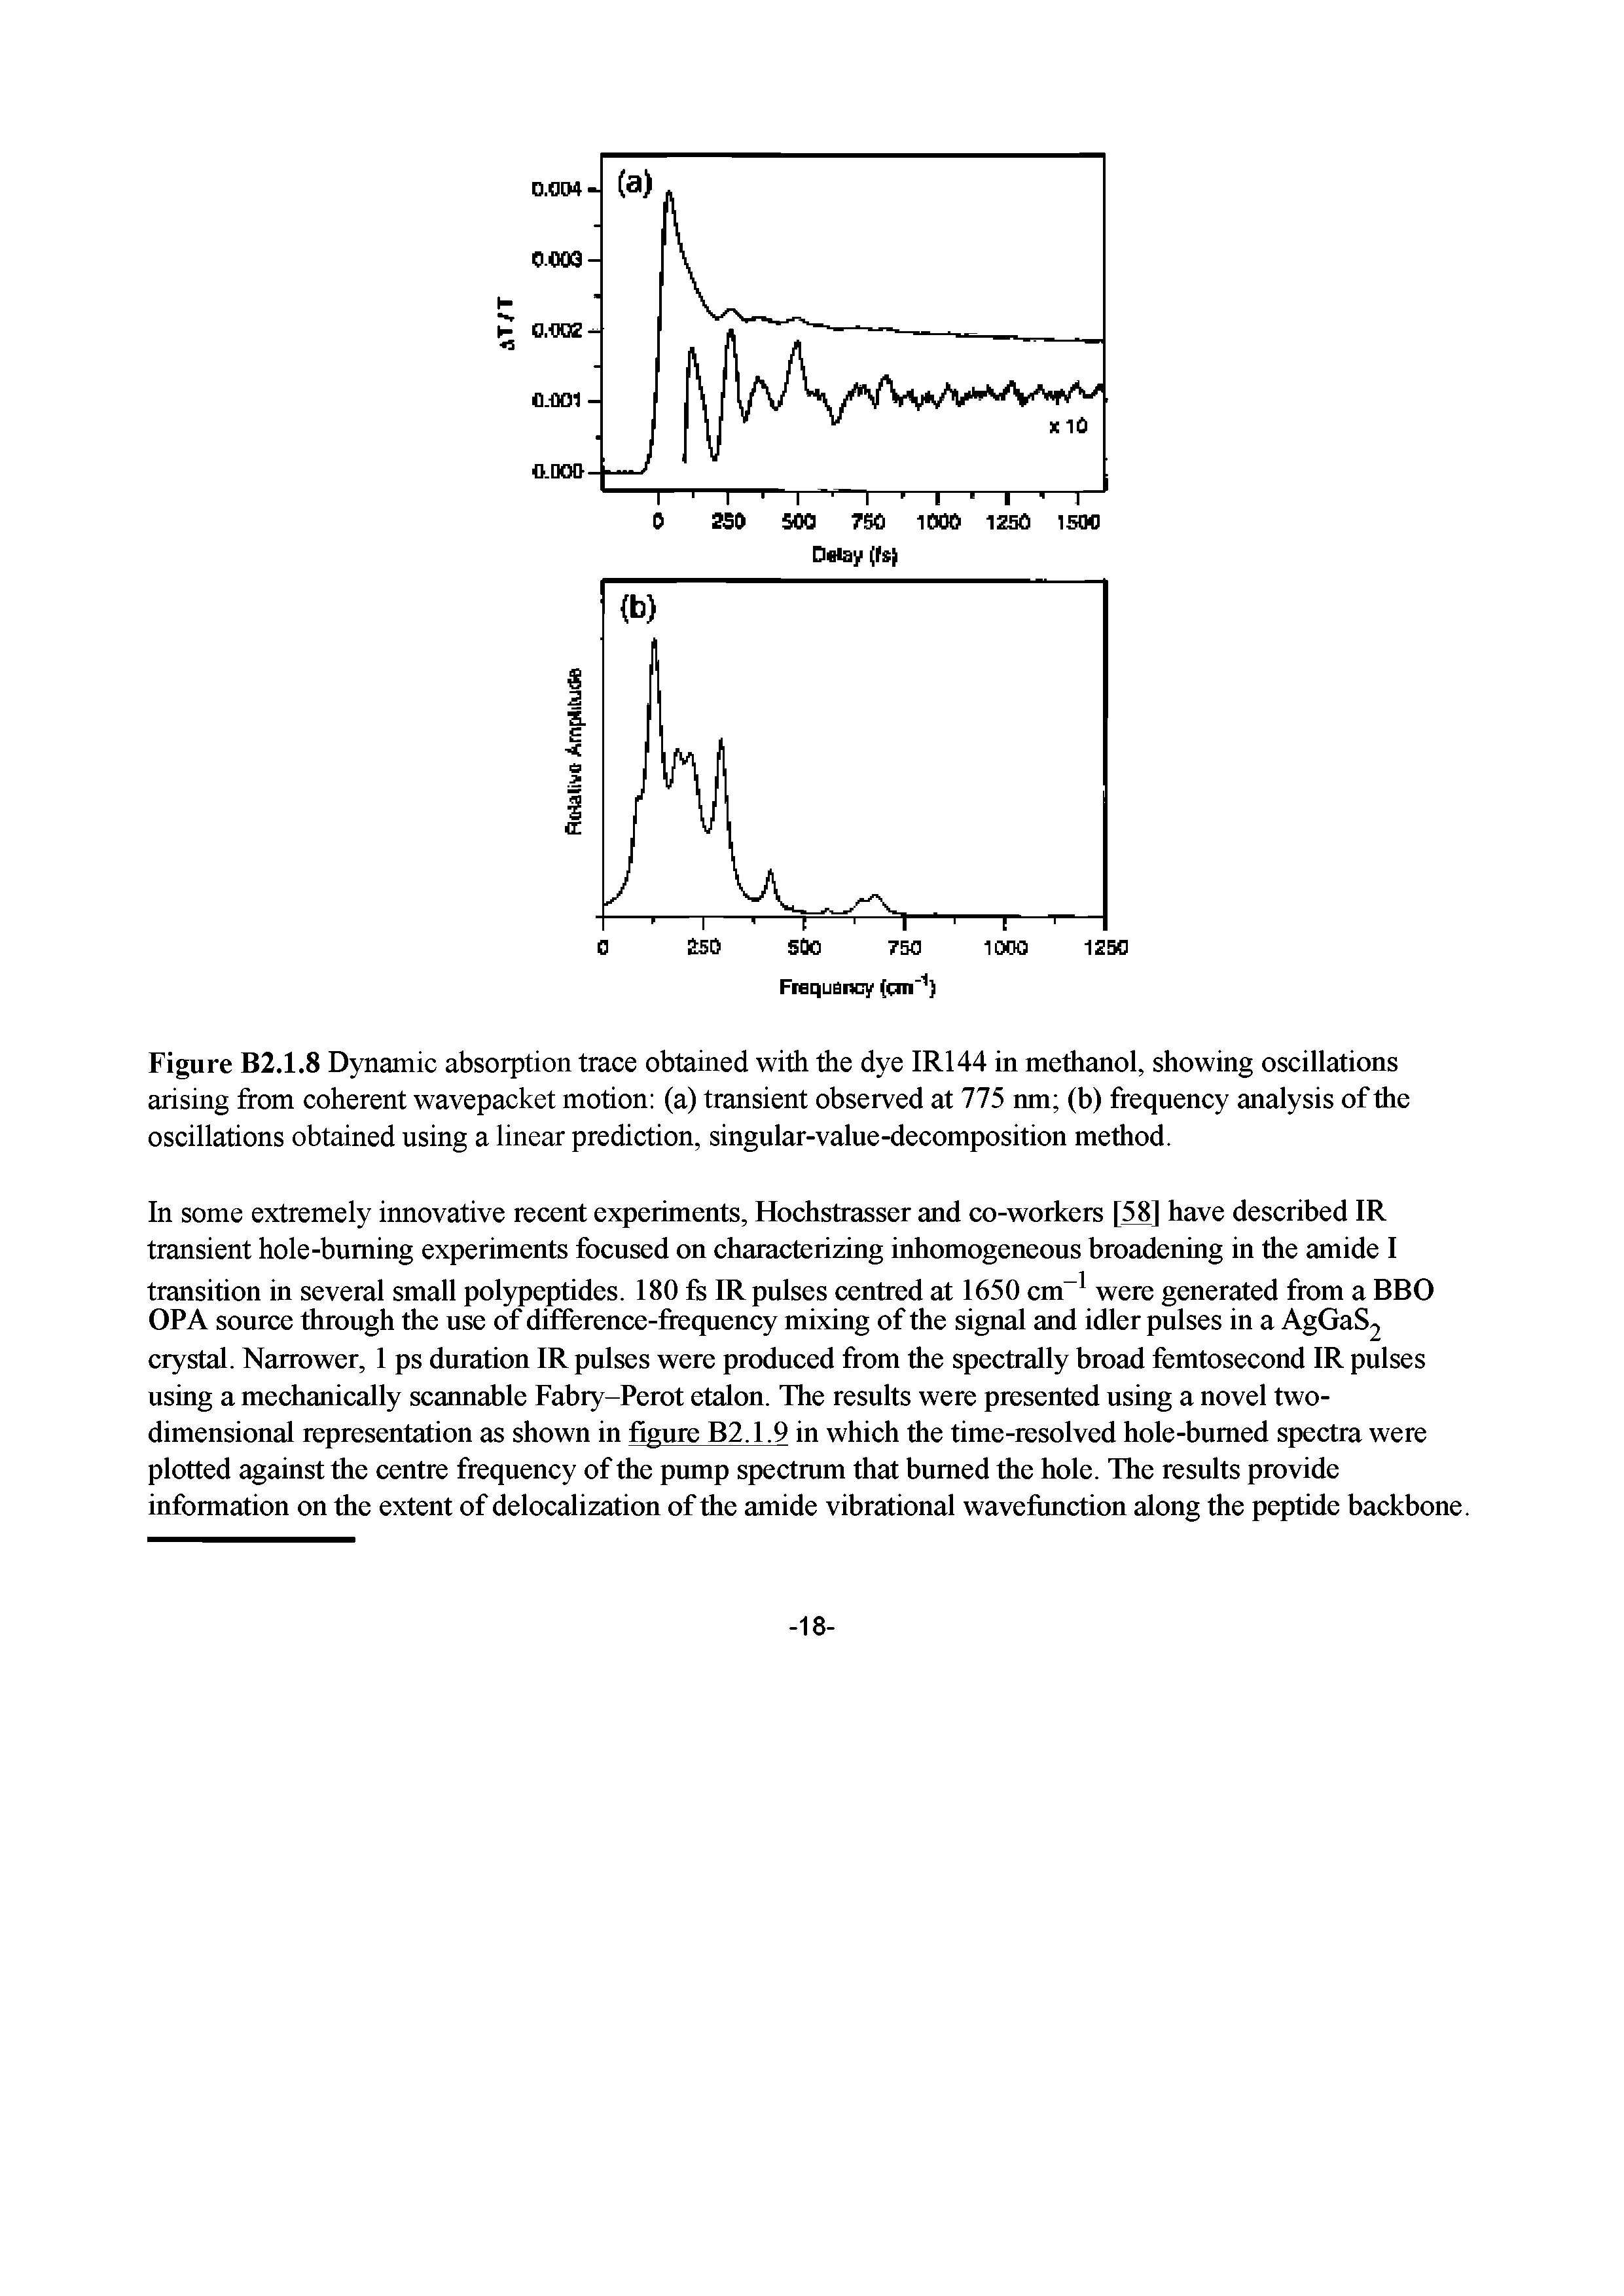 Figure B2.1.8 Dynamic absorption trace obtained with the dye IR144 in methanol, showing oscillations arising from coherent wavepacket motion (a) transient observed at 775 nm (b) frequency analysis of the oscillations obtained using a linear prediction, singular-value-decomposition method.